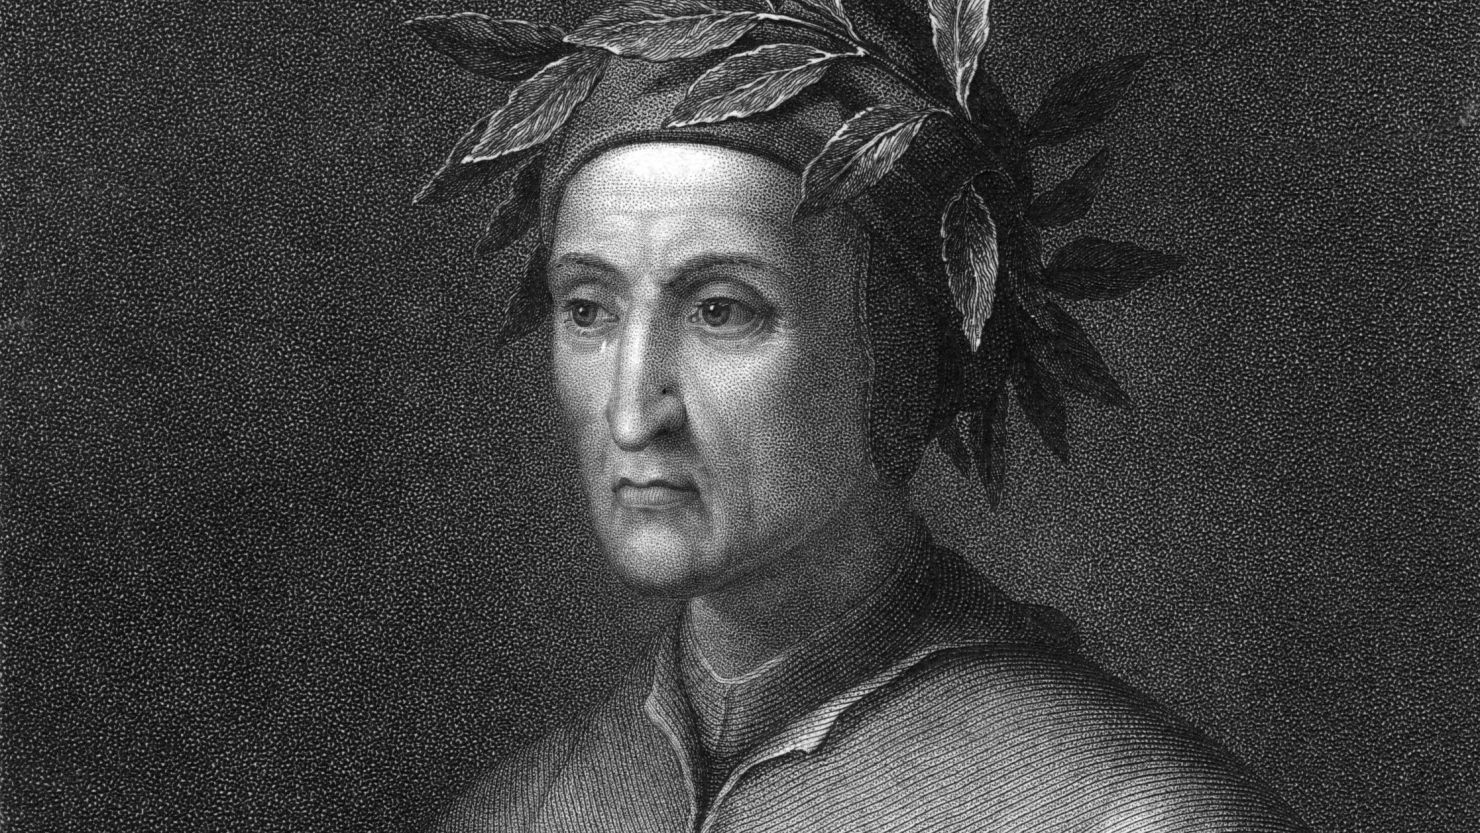 The Italian poet Dante Alighieri (1265-1321) is best known for his epic poem, the "Divine Comedy." 